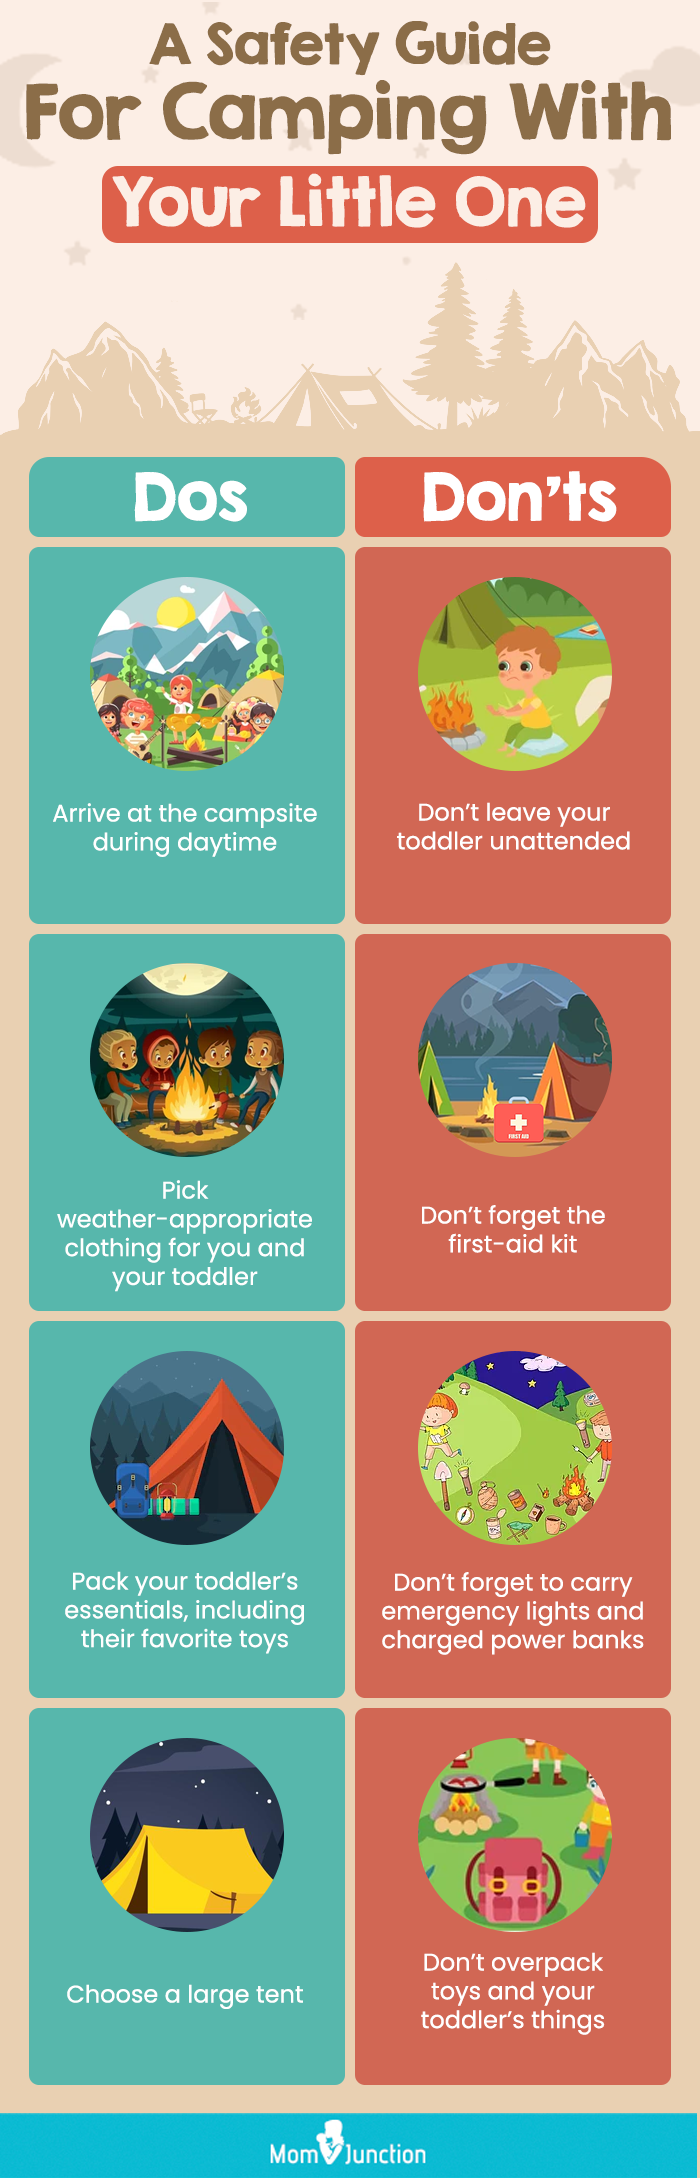 a safety guide for camping [infographic]